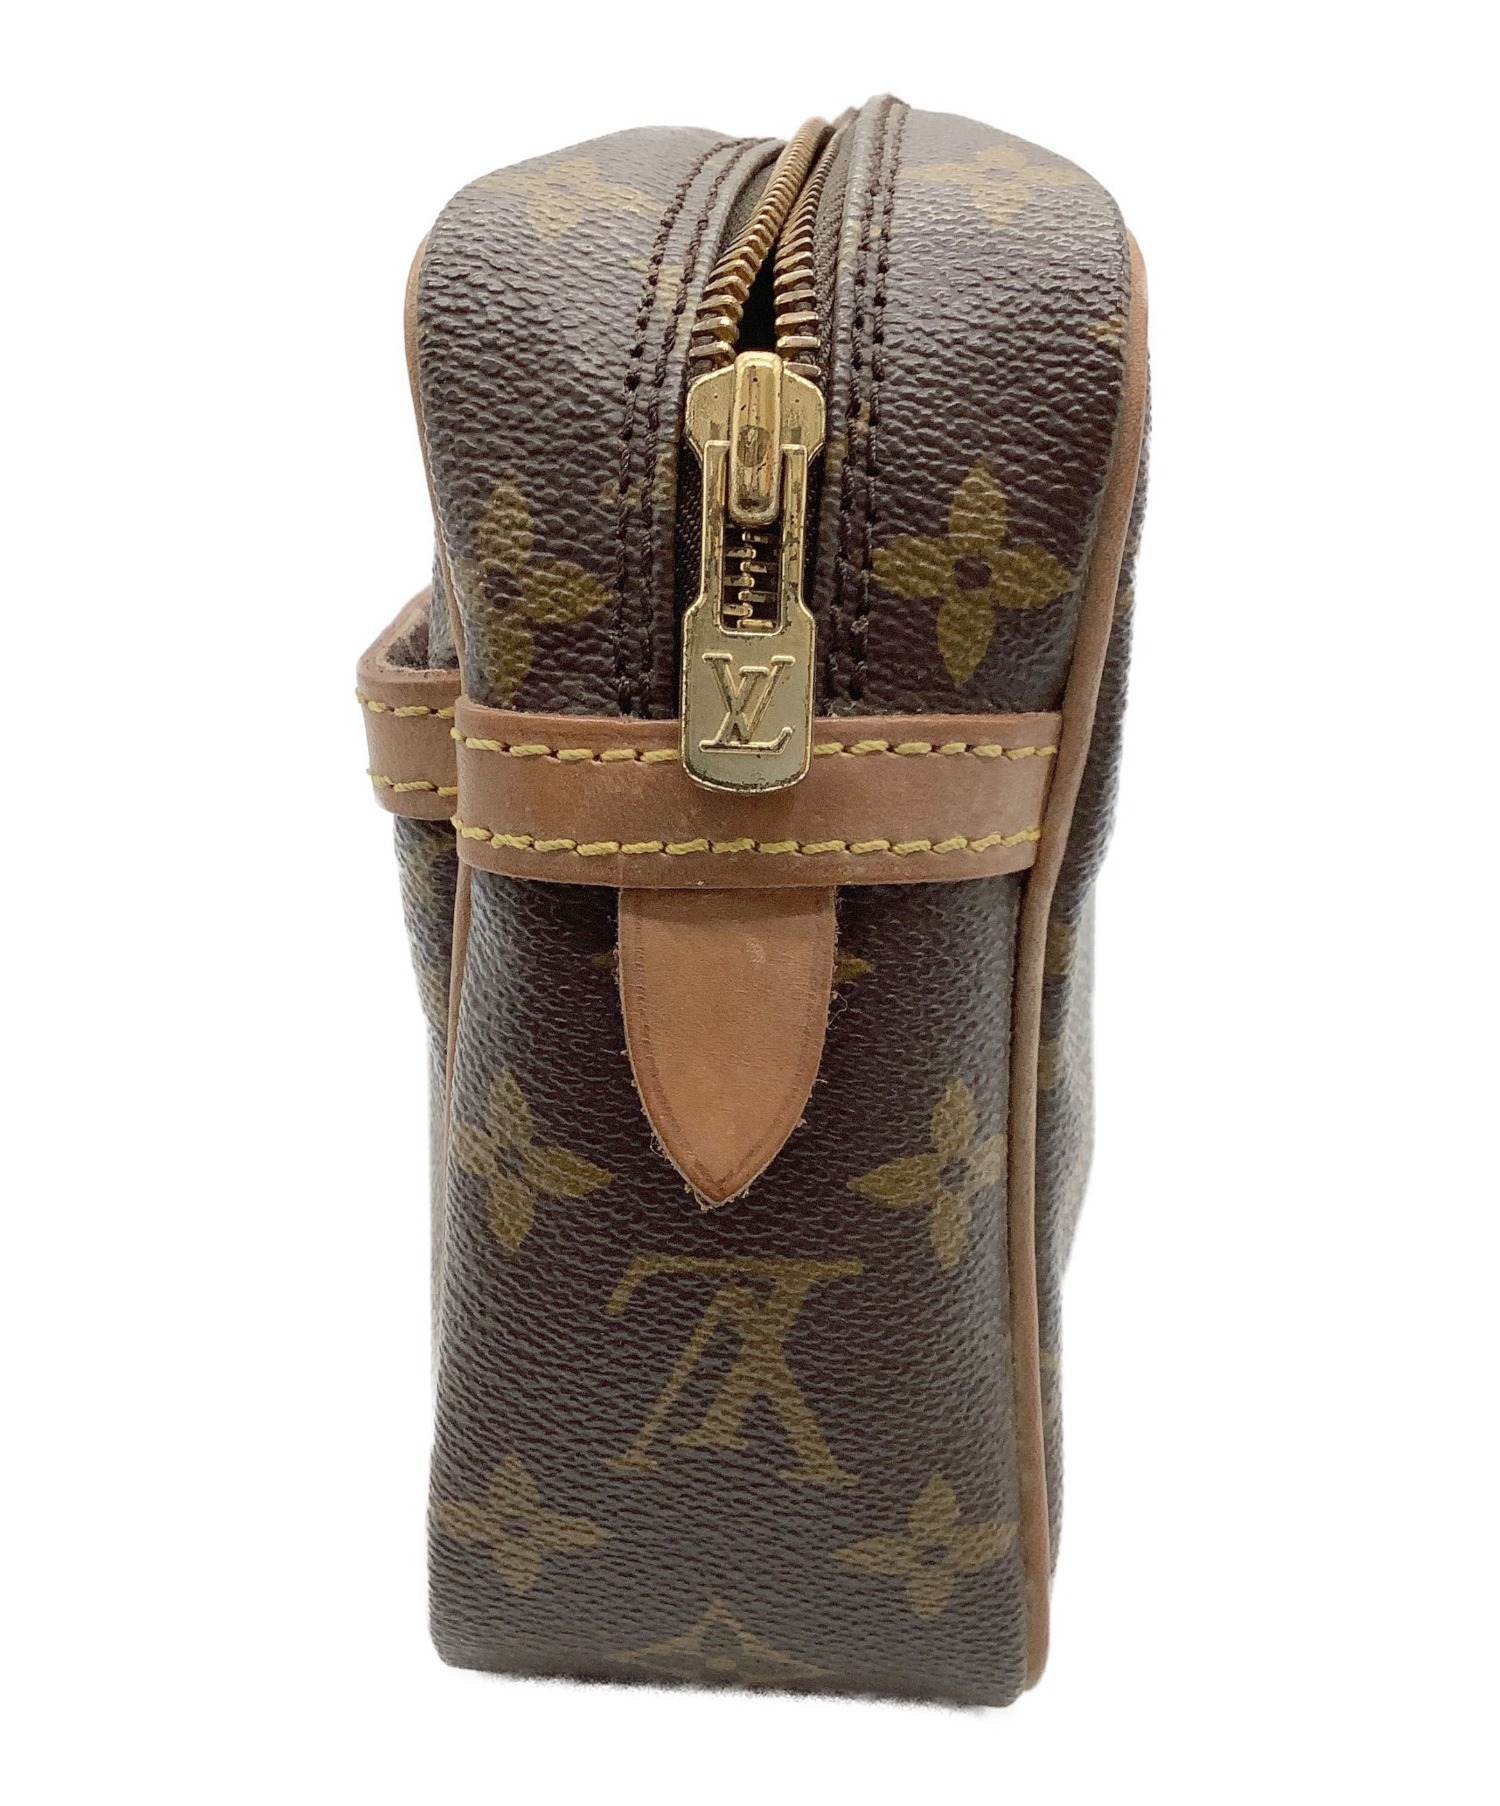 LOUIS VUITTON (ルイ ヴィトン) コンピエーニュ23 モノグラム コンピエーニュ23 M51847 883 TH